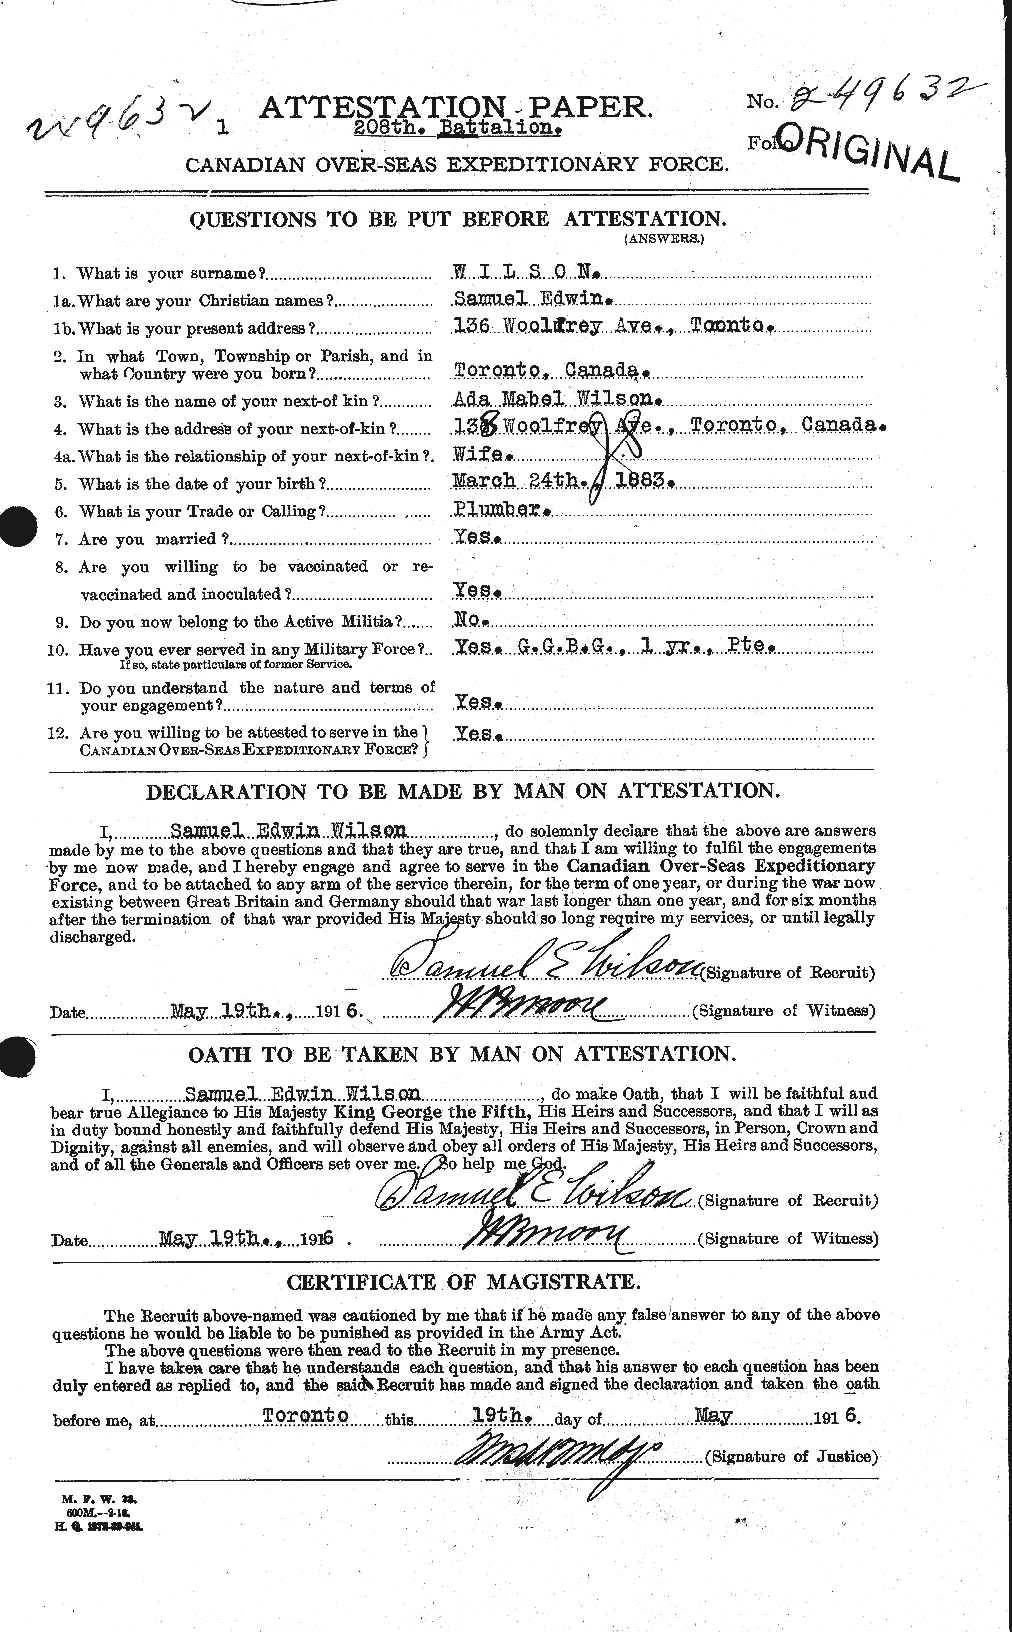 Personnel Records of the First World War - CEF 681112a